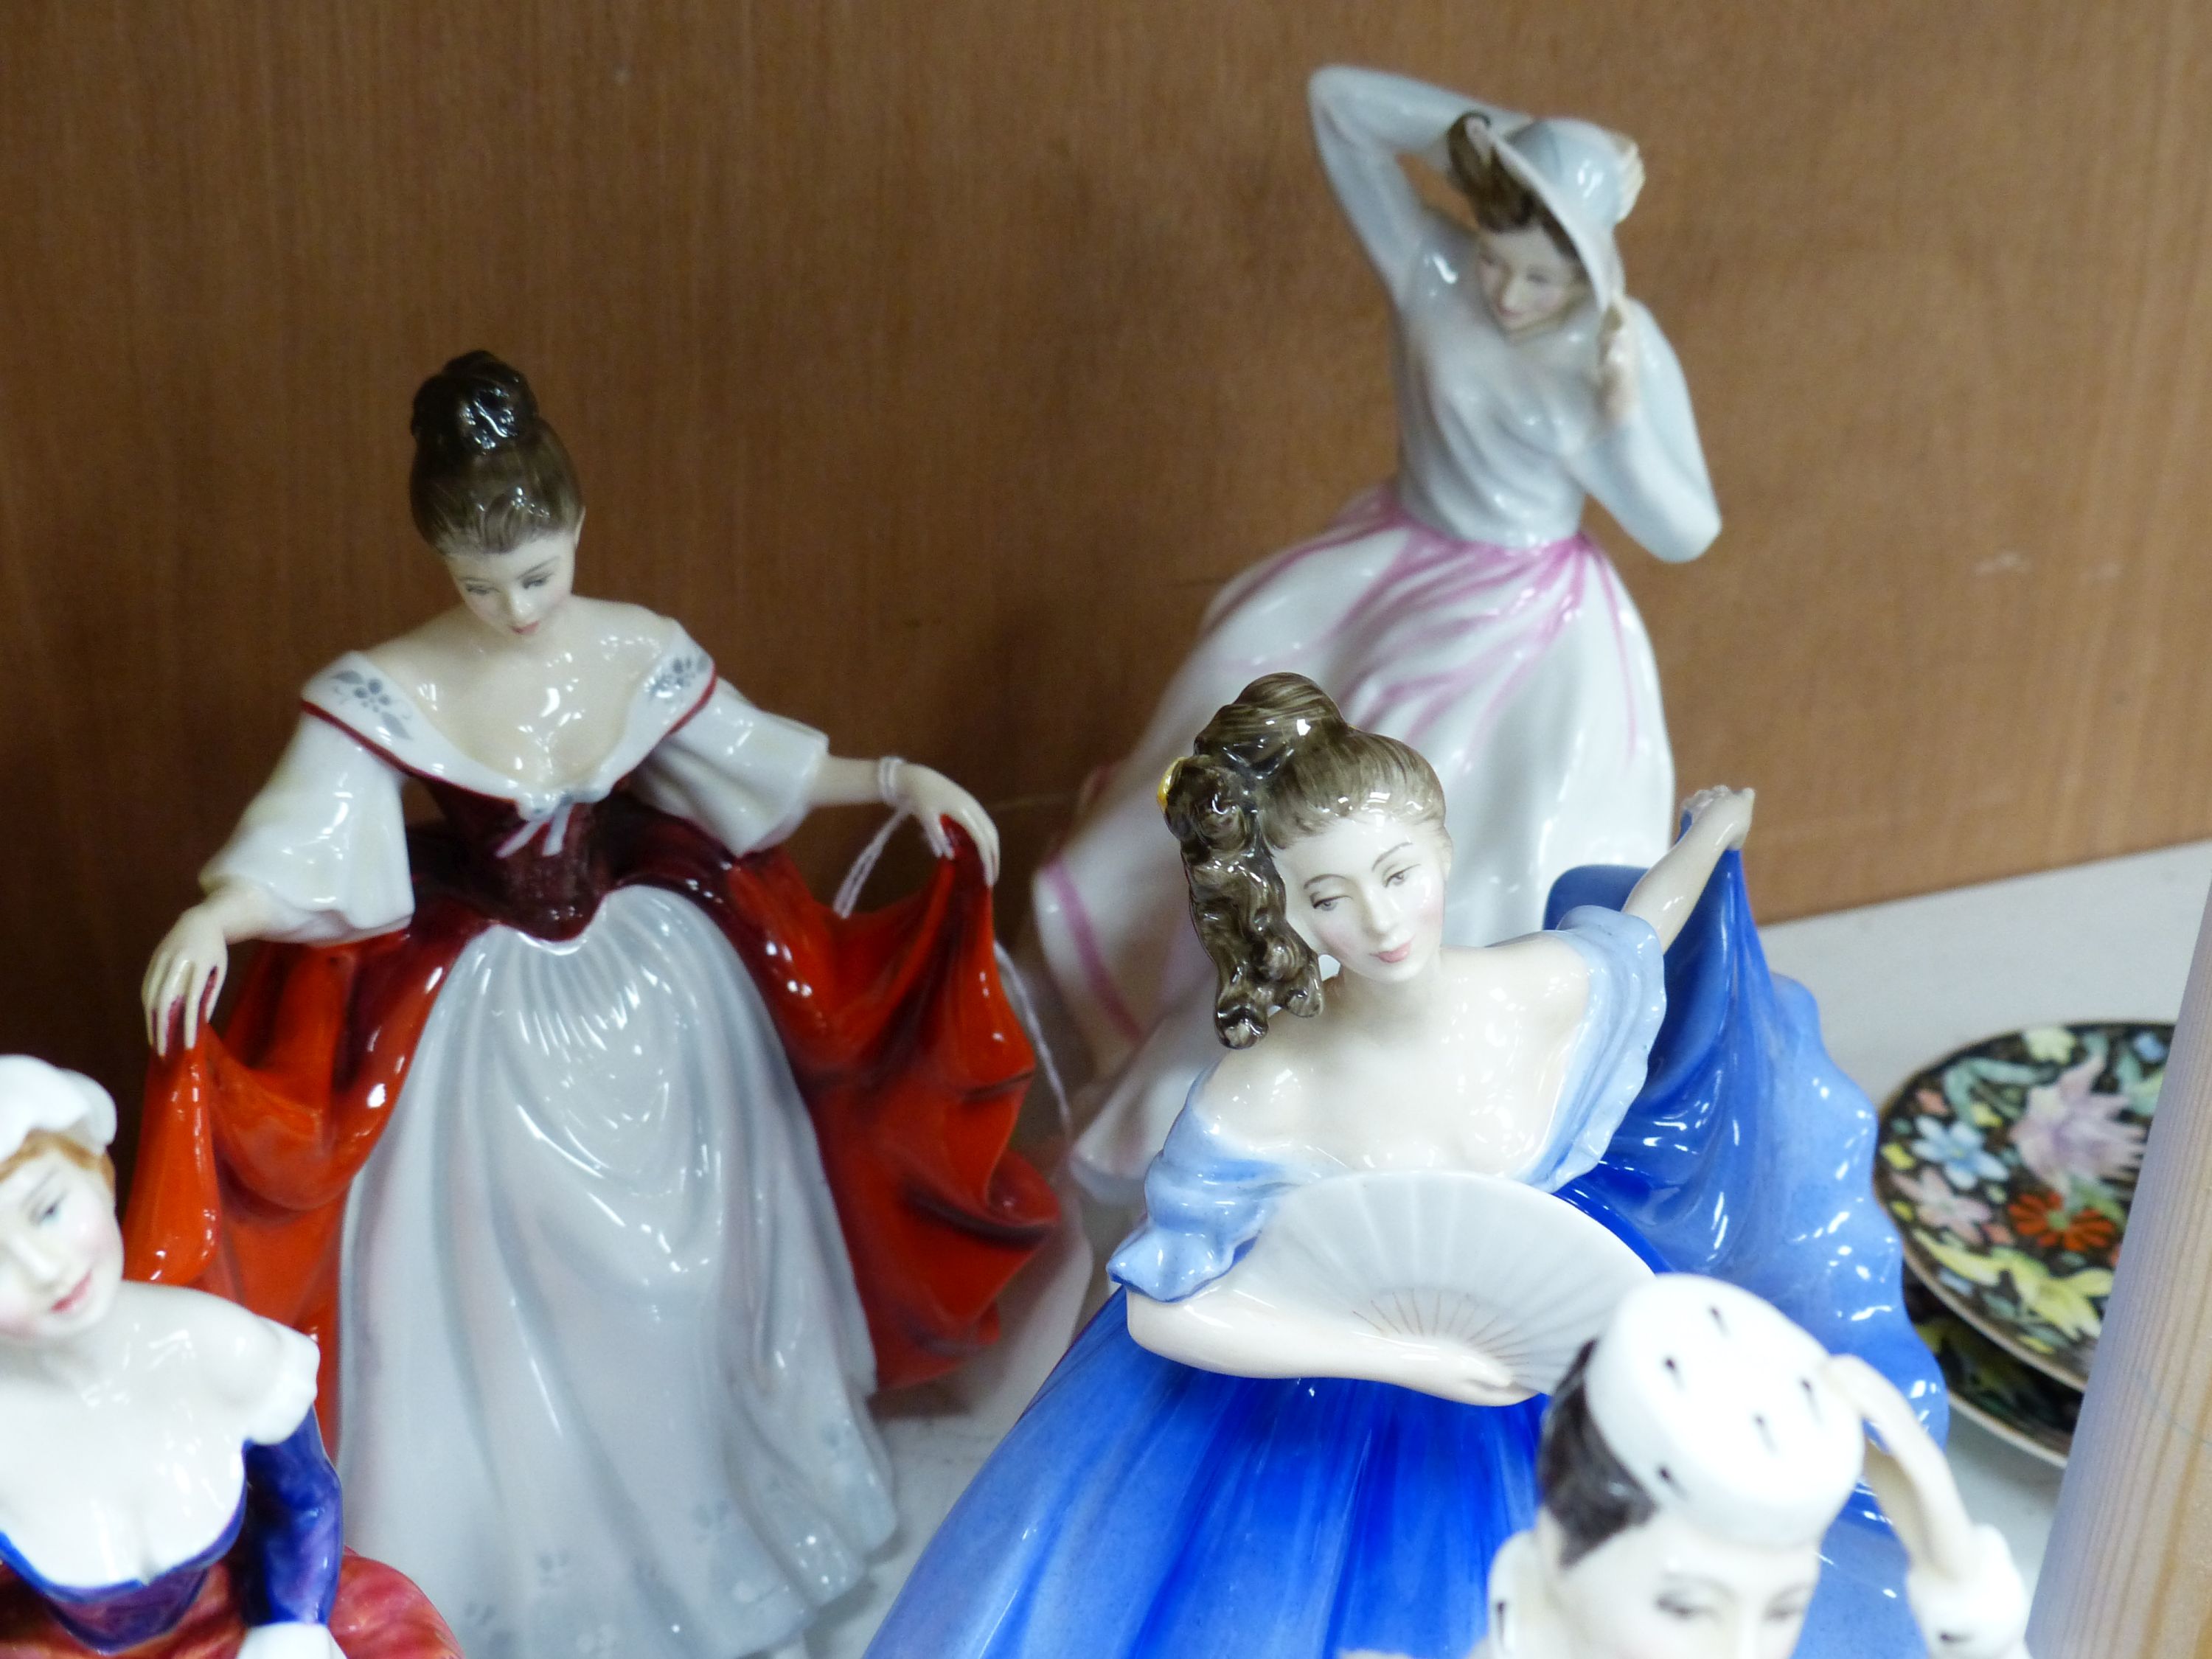 Ten Royal Doulton figurines, including 'Sara', 'The Judge', 'The Old Balloon Seller', 'Elaine' and others